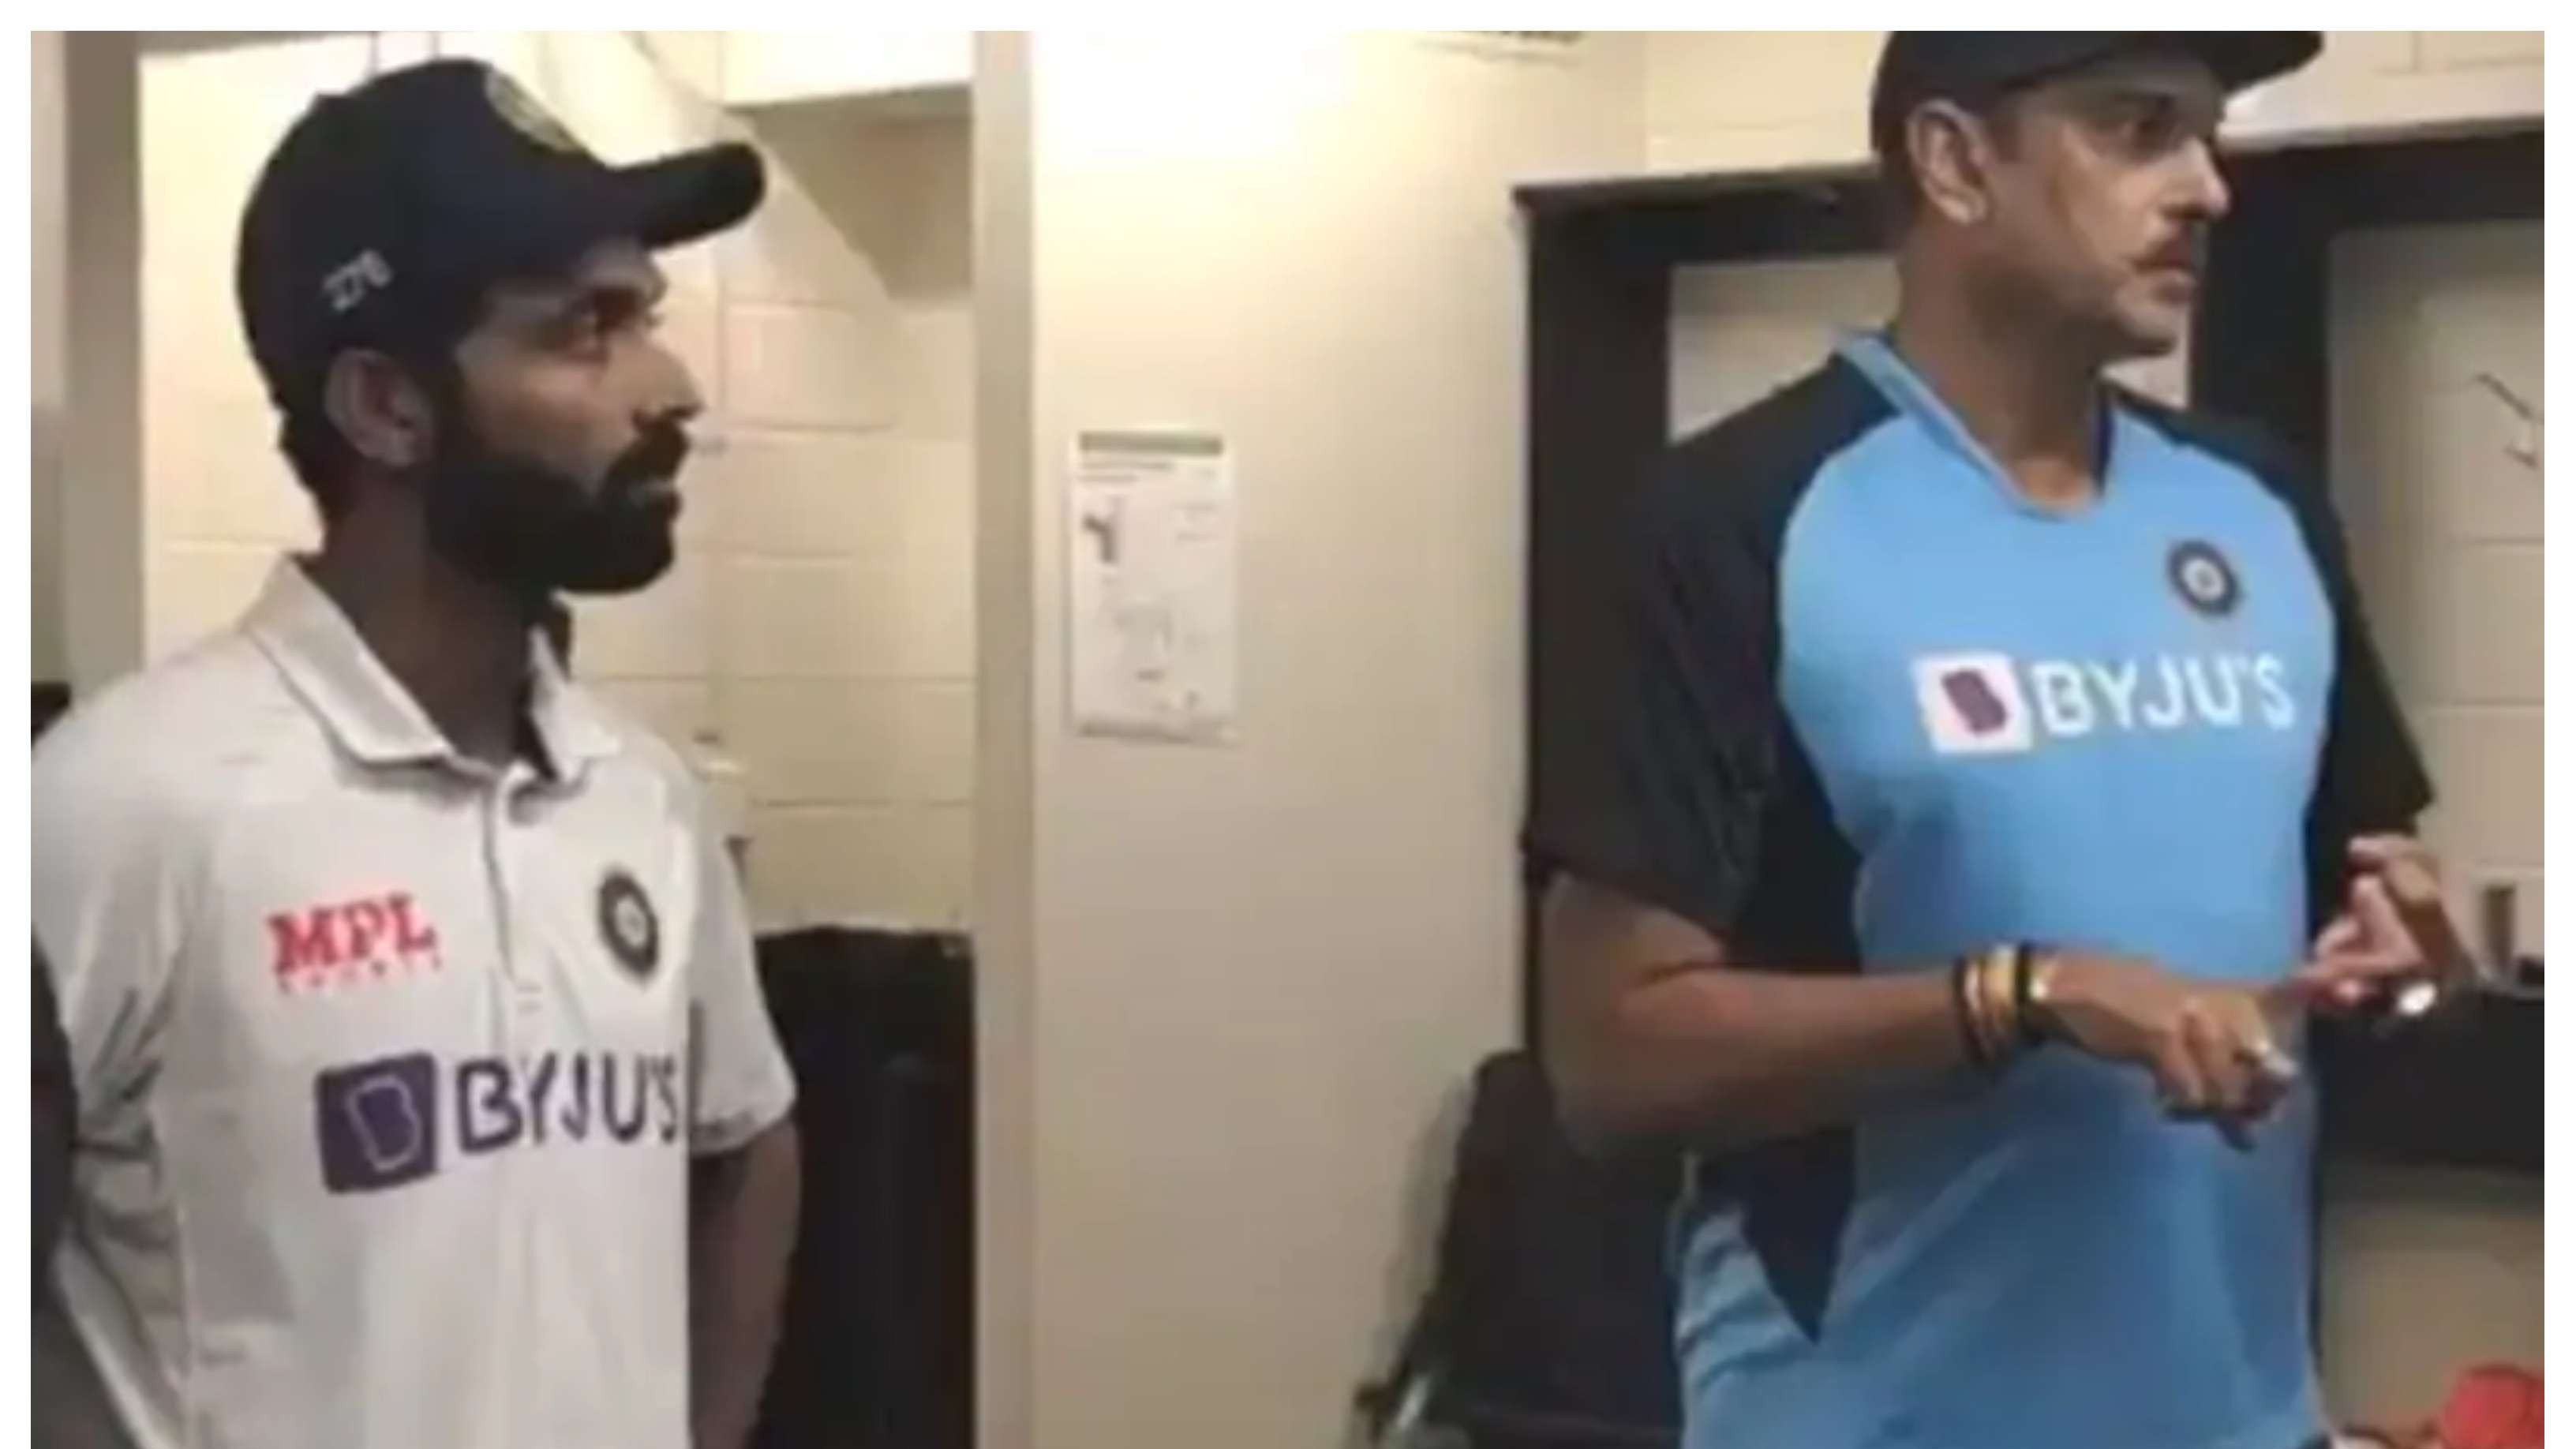 AUS v IND 2020-21: WATCH – Ravi Shastri delivers special speech in dressing room after India’s historic series win